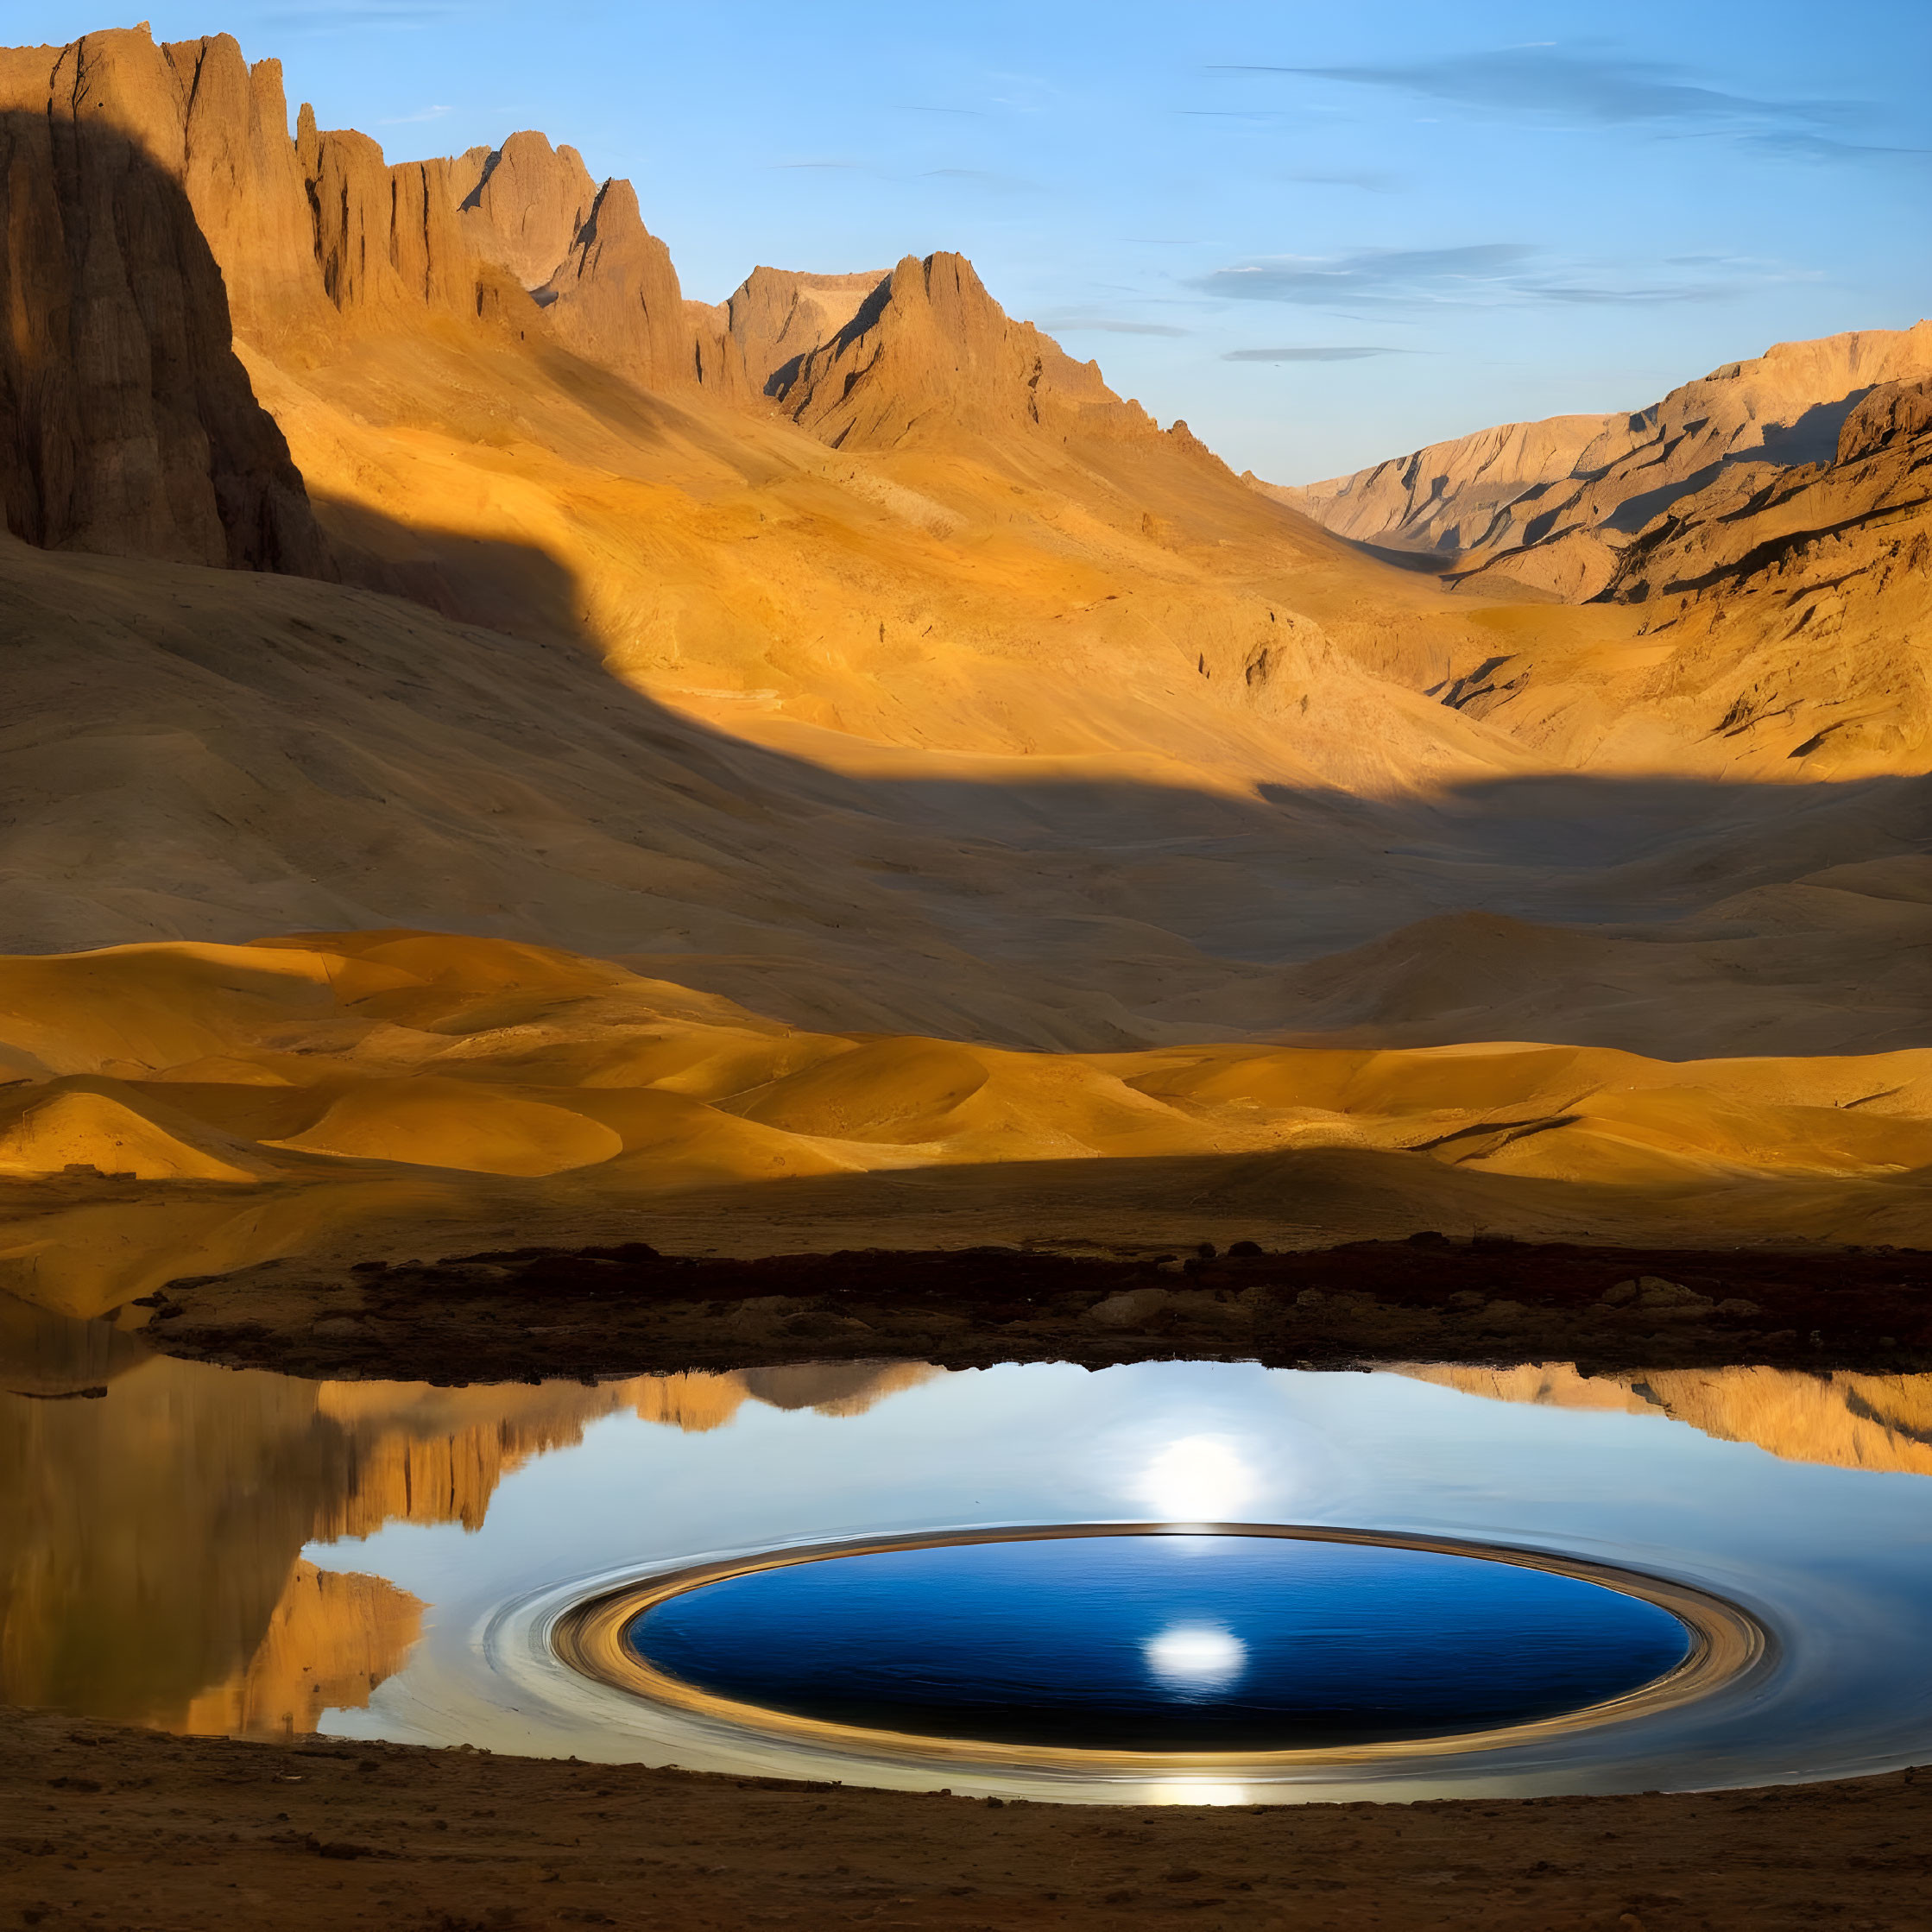 Mountain landscape at sunset with reflective pond & golden cliffs